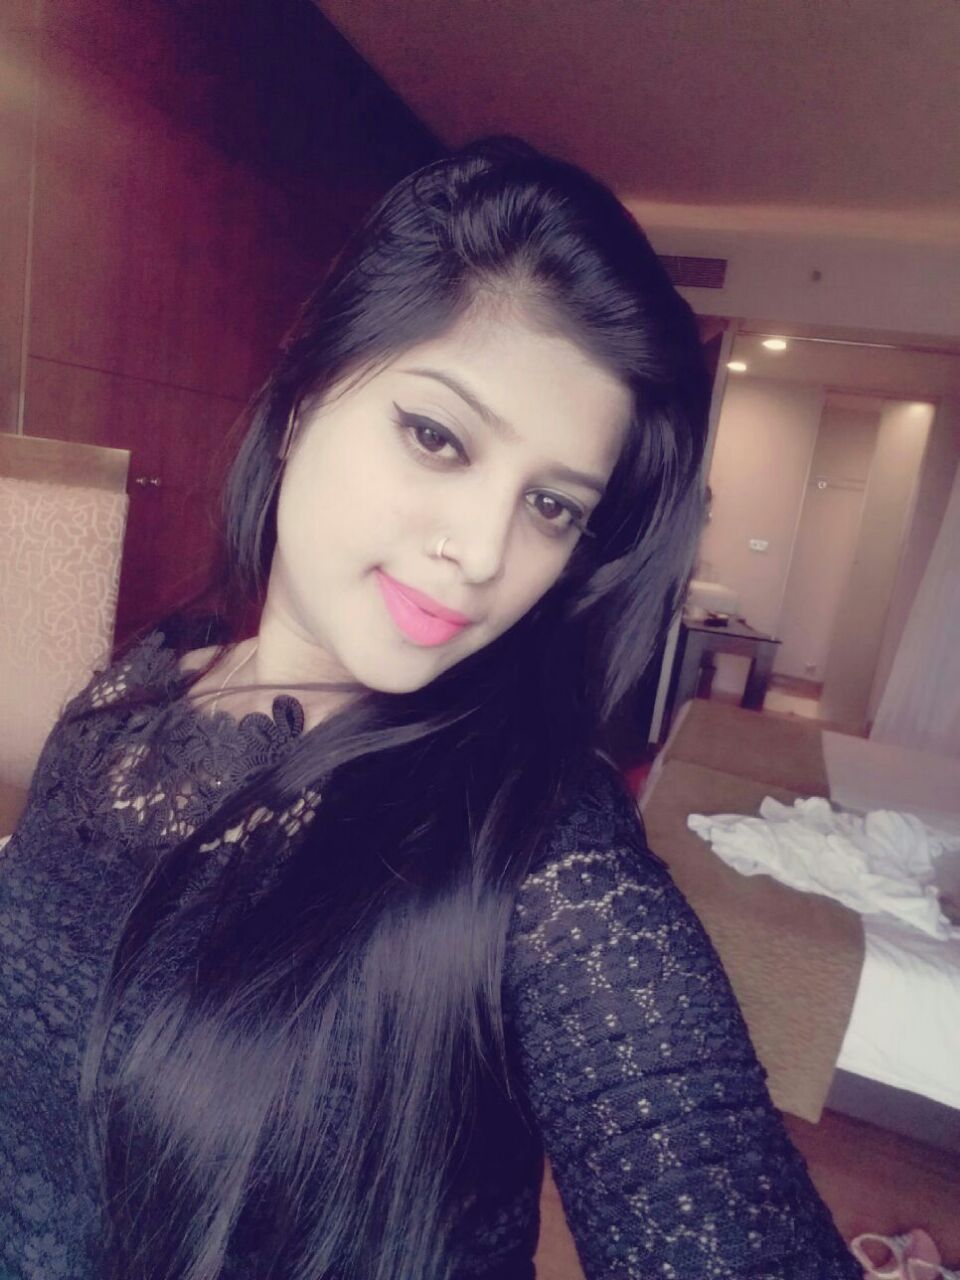 Escort Girl Annu from India (2)